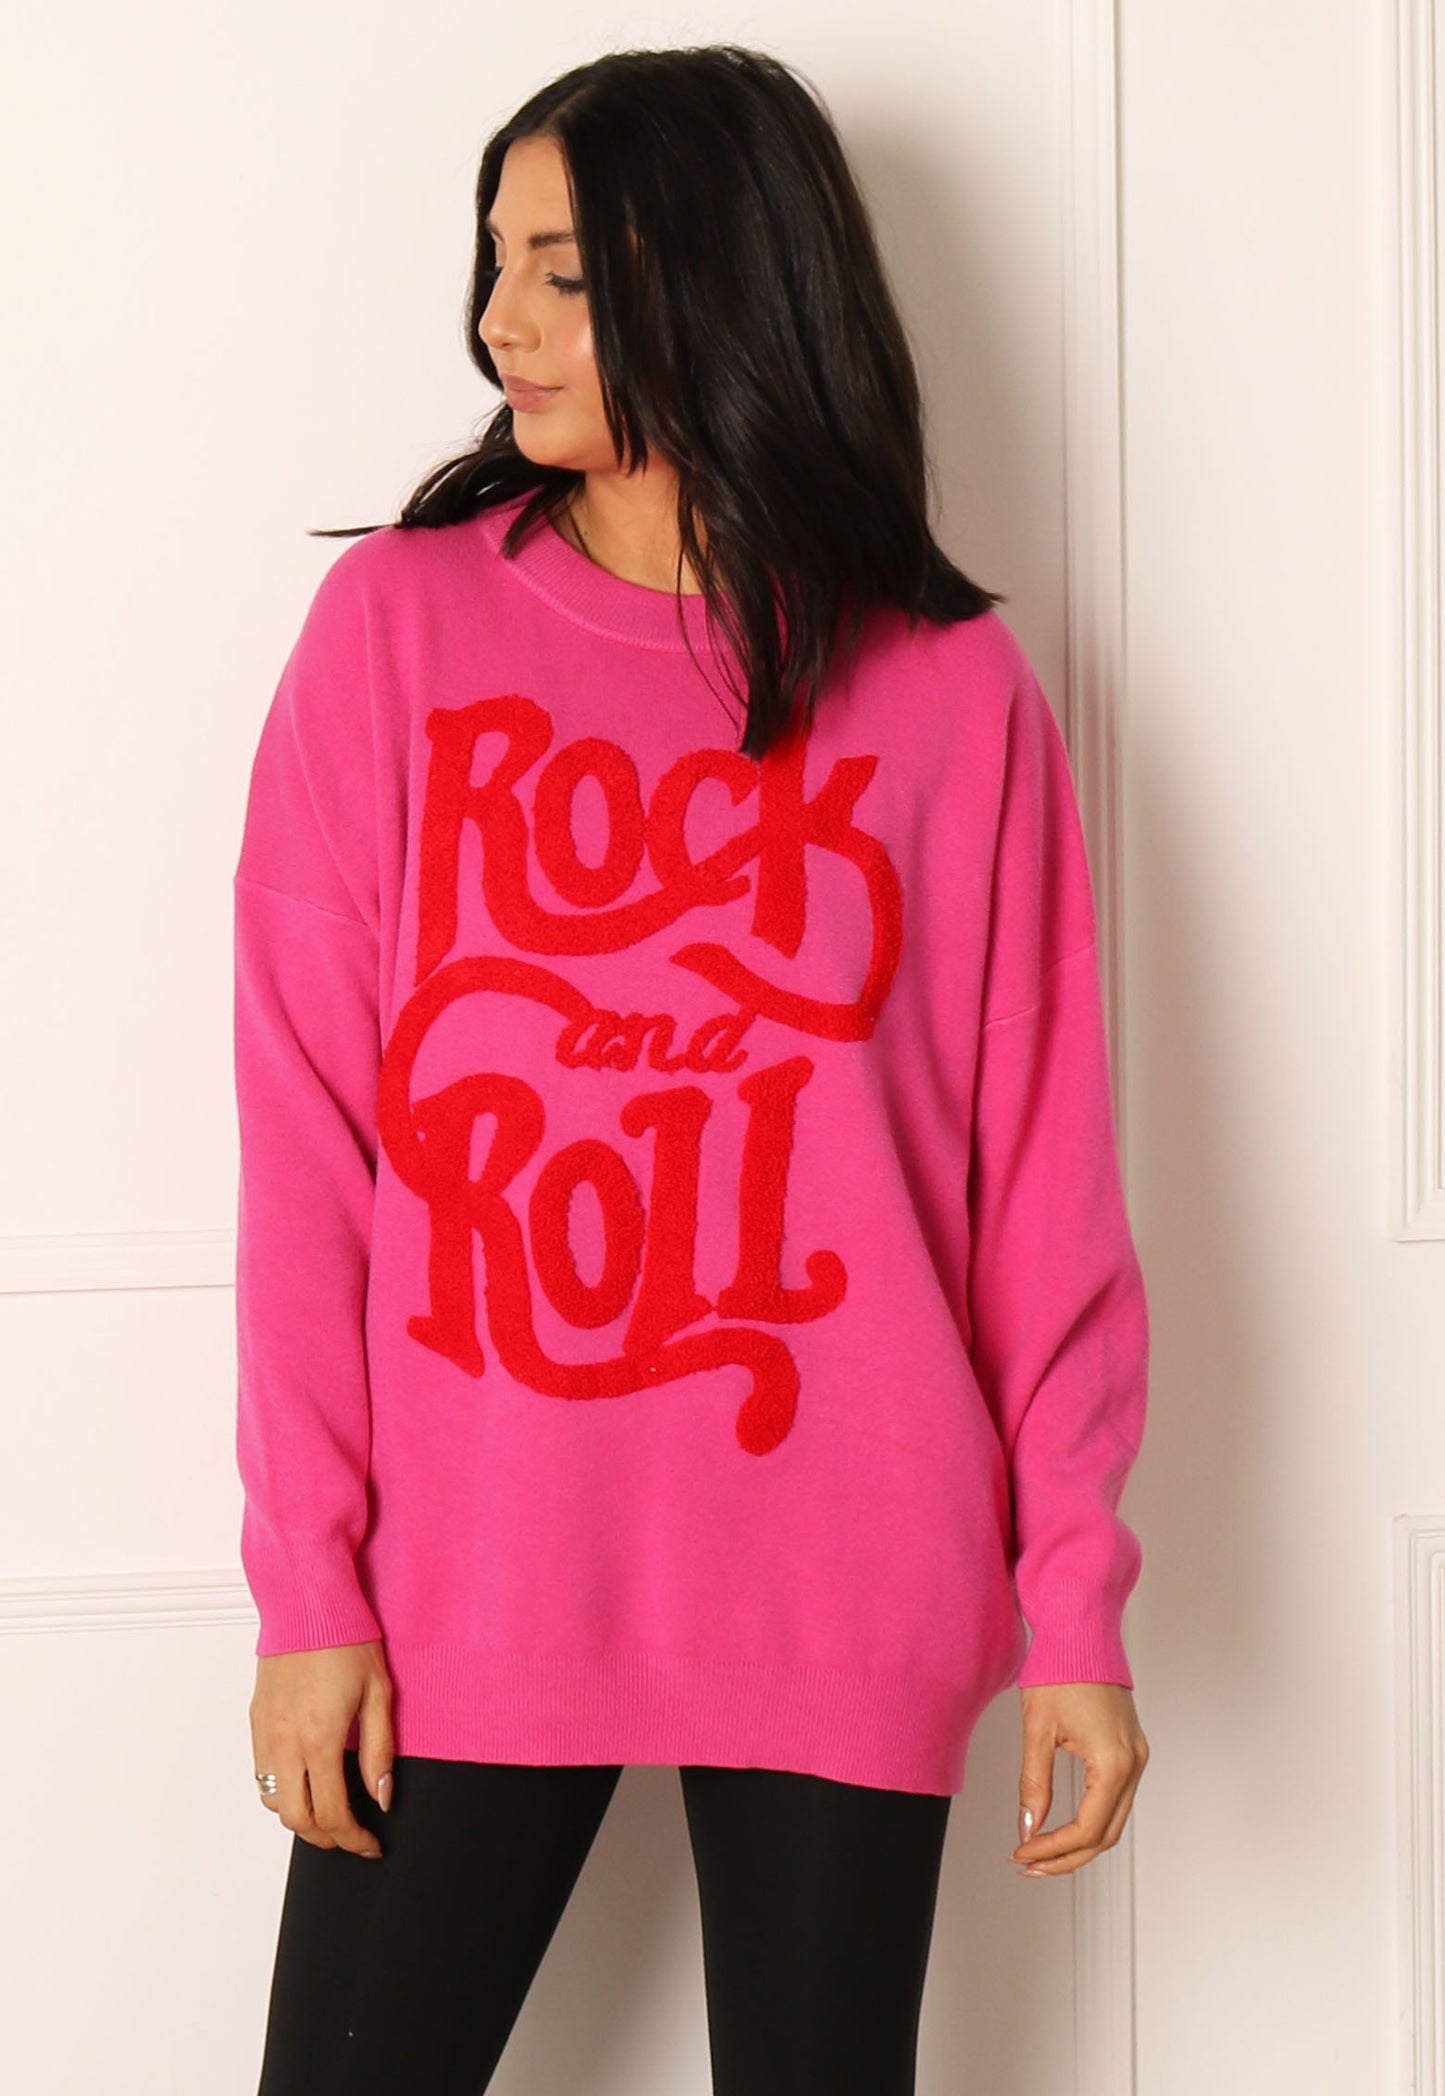 Wavy Rock and Roll Slogan Oversized Soft Knit Jumper in Pink & Red - concretebartops